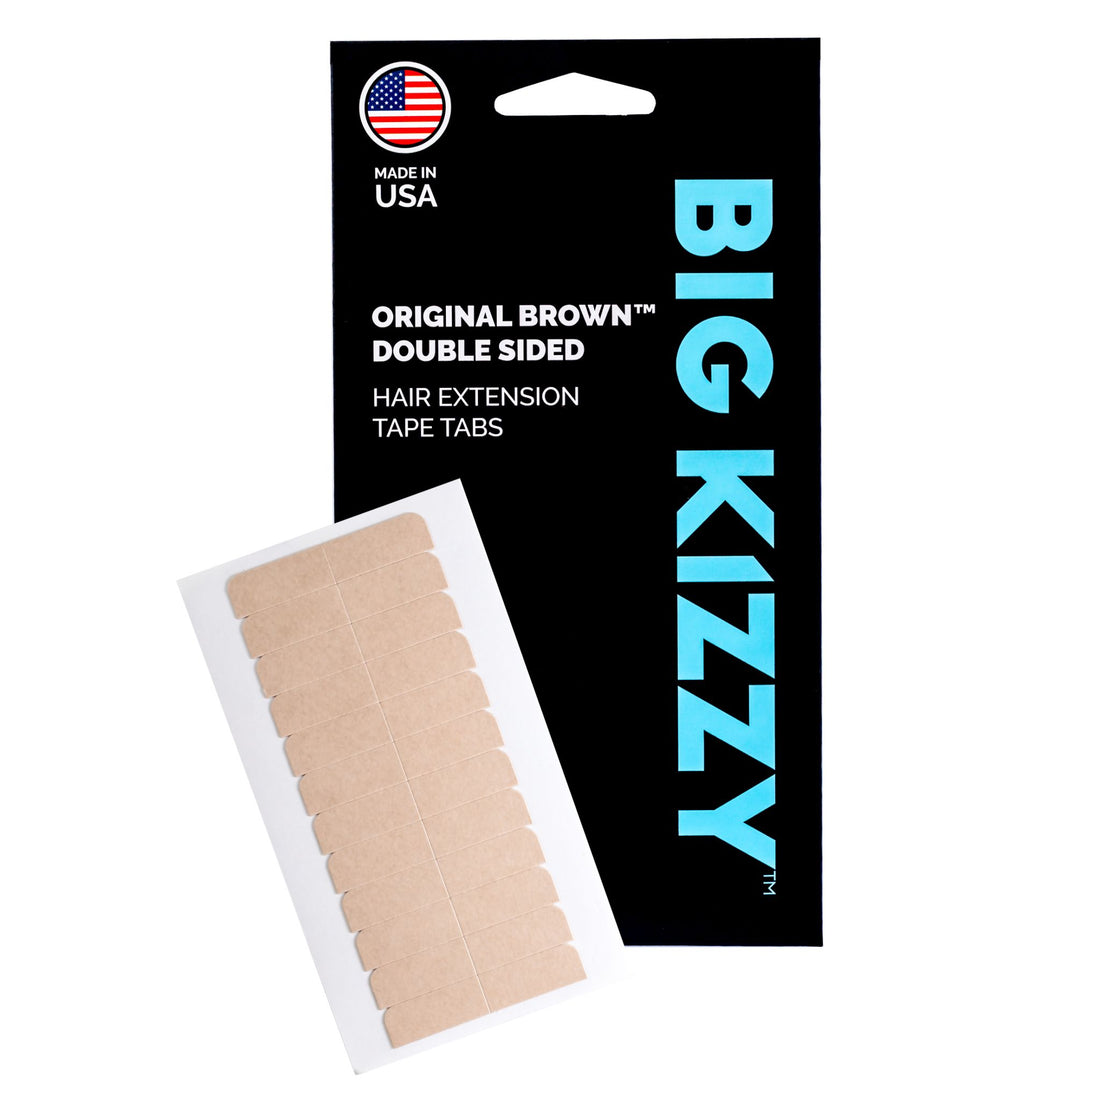 Big Kizzy® Original Brown Double Sided Hair Extension Replacement Tape Tabs Packaging with a tape tab sheet overlayed on top of it